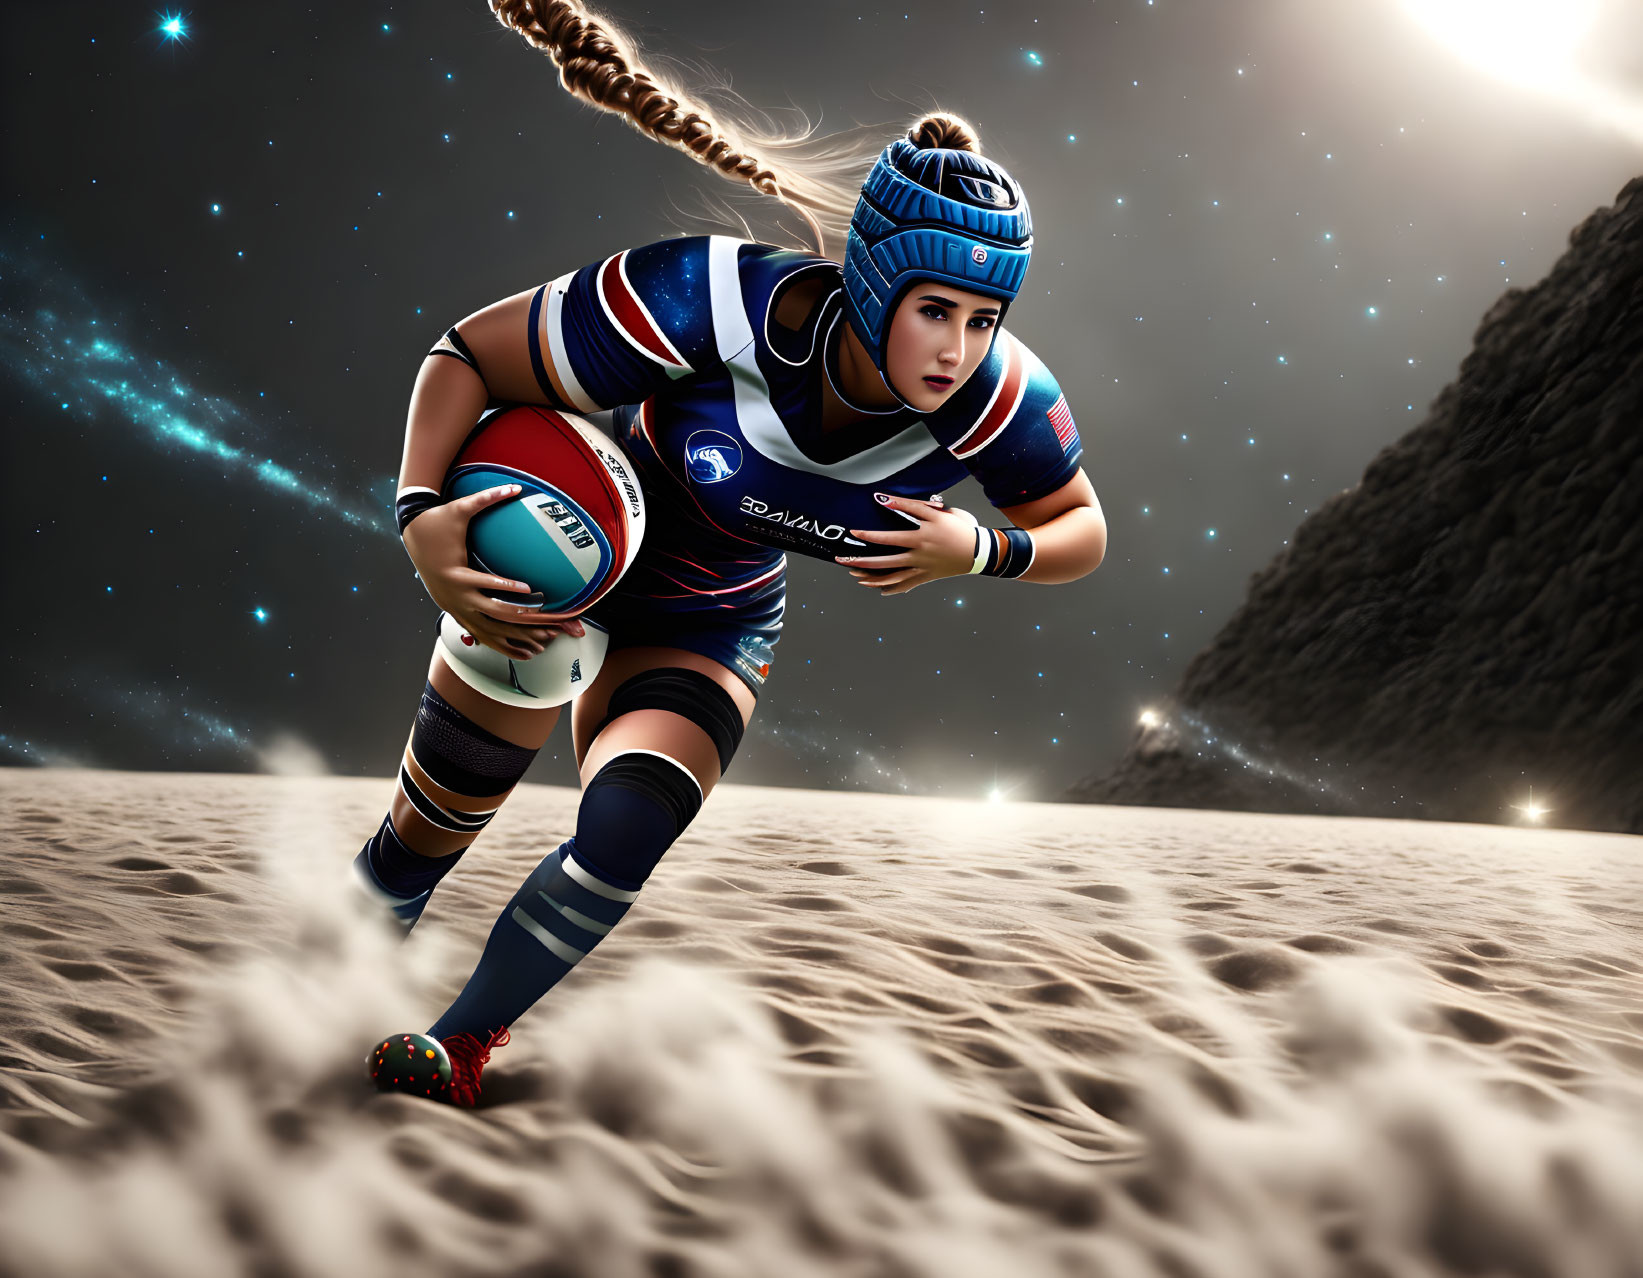 Female rugby player in 3D running on sandy surface under starry sky